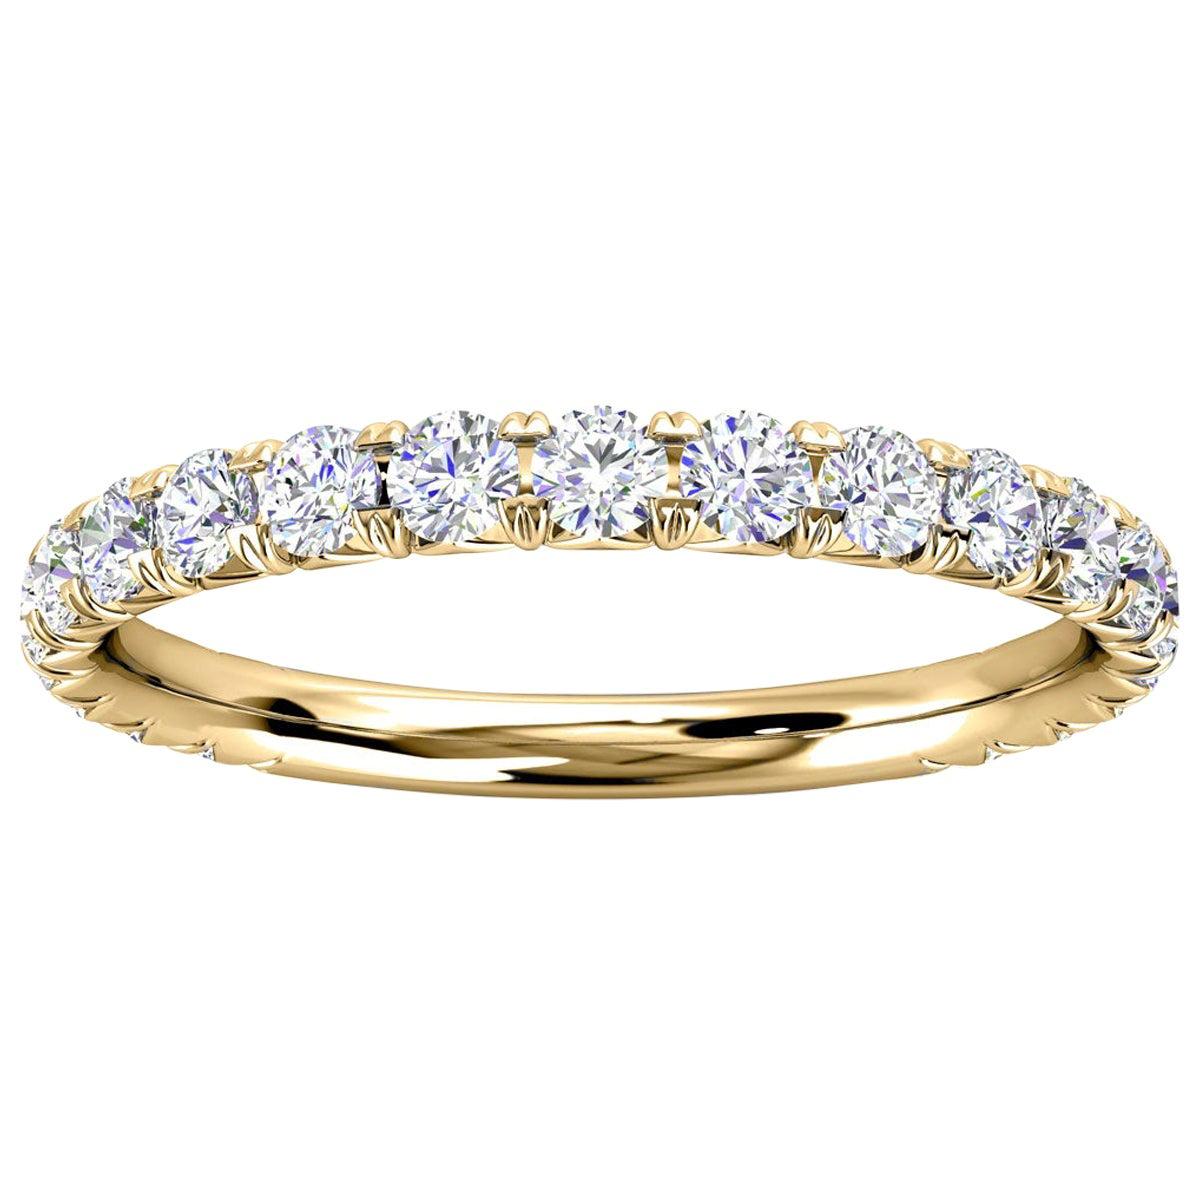 For Sale:  14K Yellow Gold Gia French Pave Diamond Ring '1/2 Ct. tw'